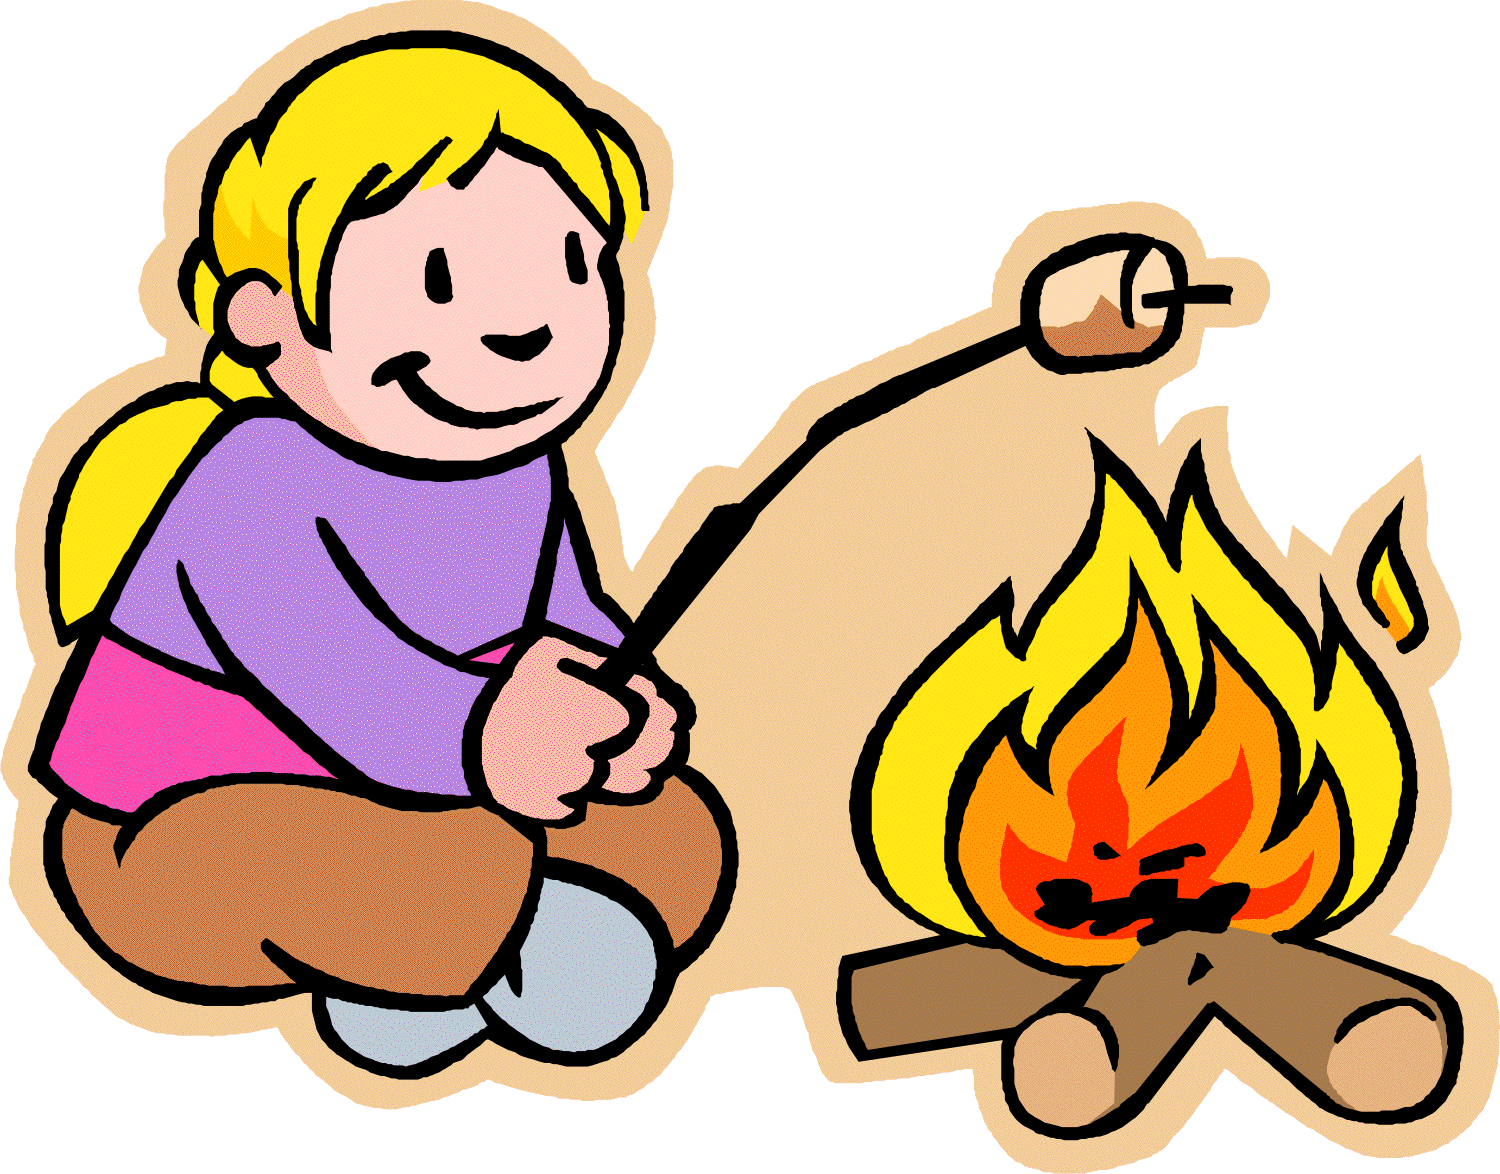 Campfire clipart camp fire image 2 2